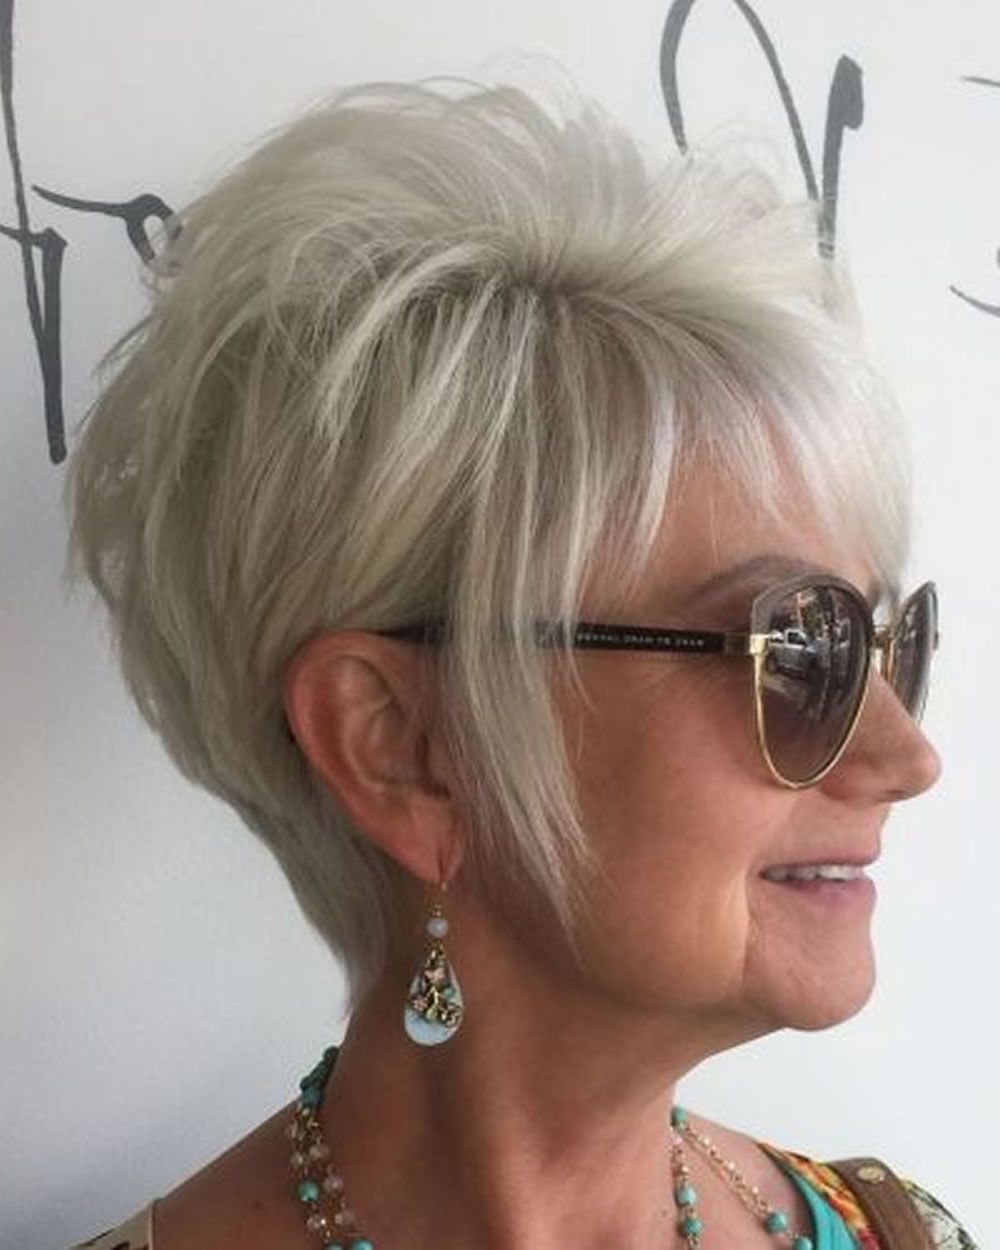 Pixie Short Haircuts For Older Women Over 50 & 2018 2019 Short With Short Hairstyles For Over 50s Women (View 14 of 25)